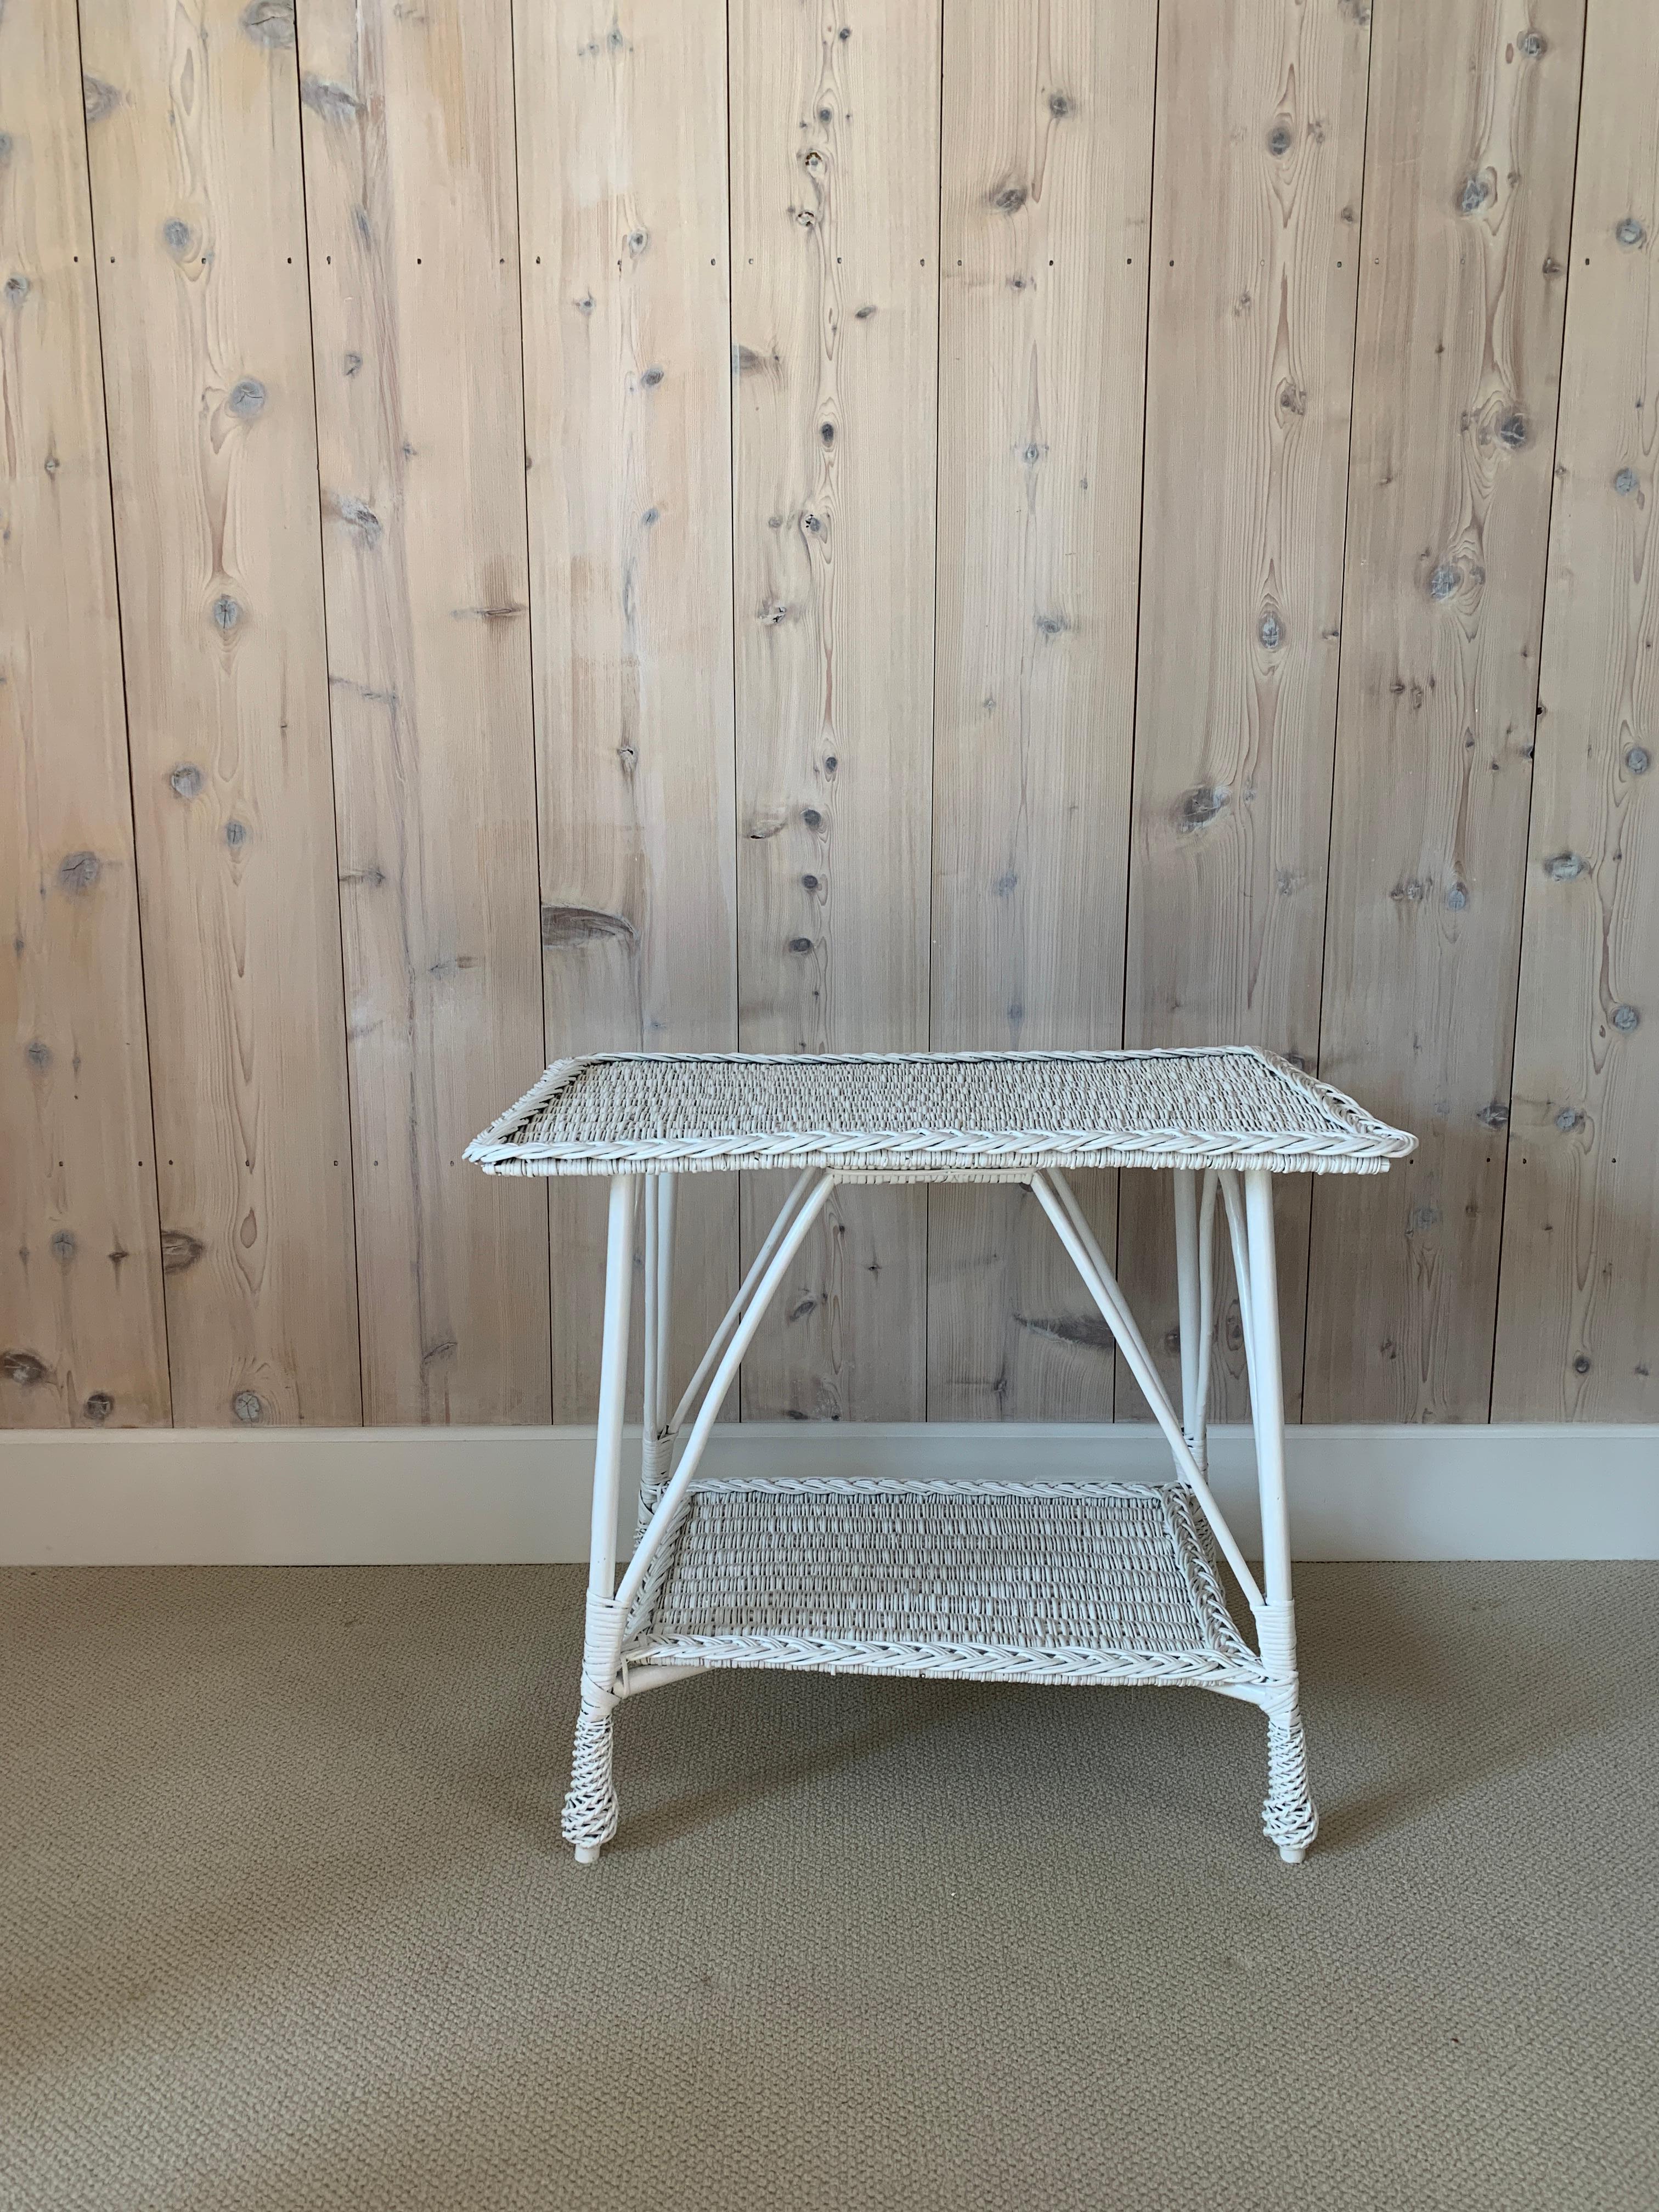 American Antique Wicker Table For Sale